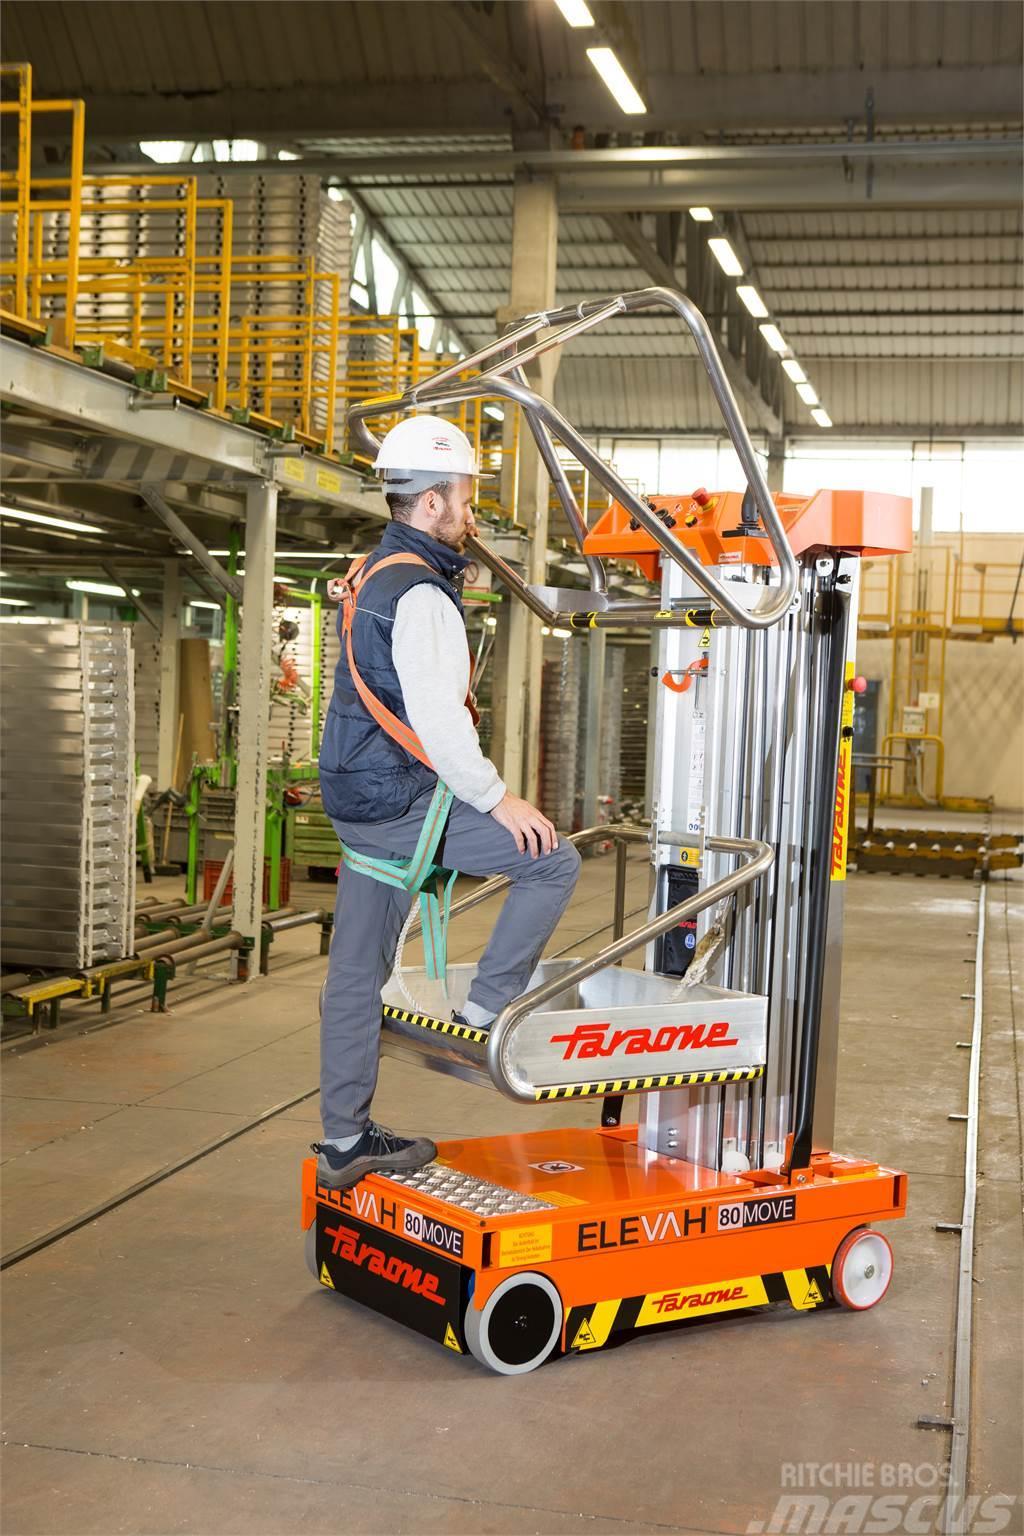 Elevah 80 Move by Faraone Used Personnel lifts and access elevators